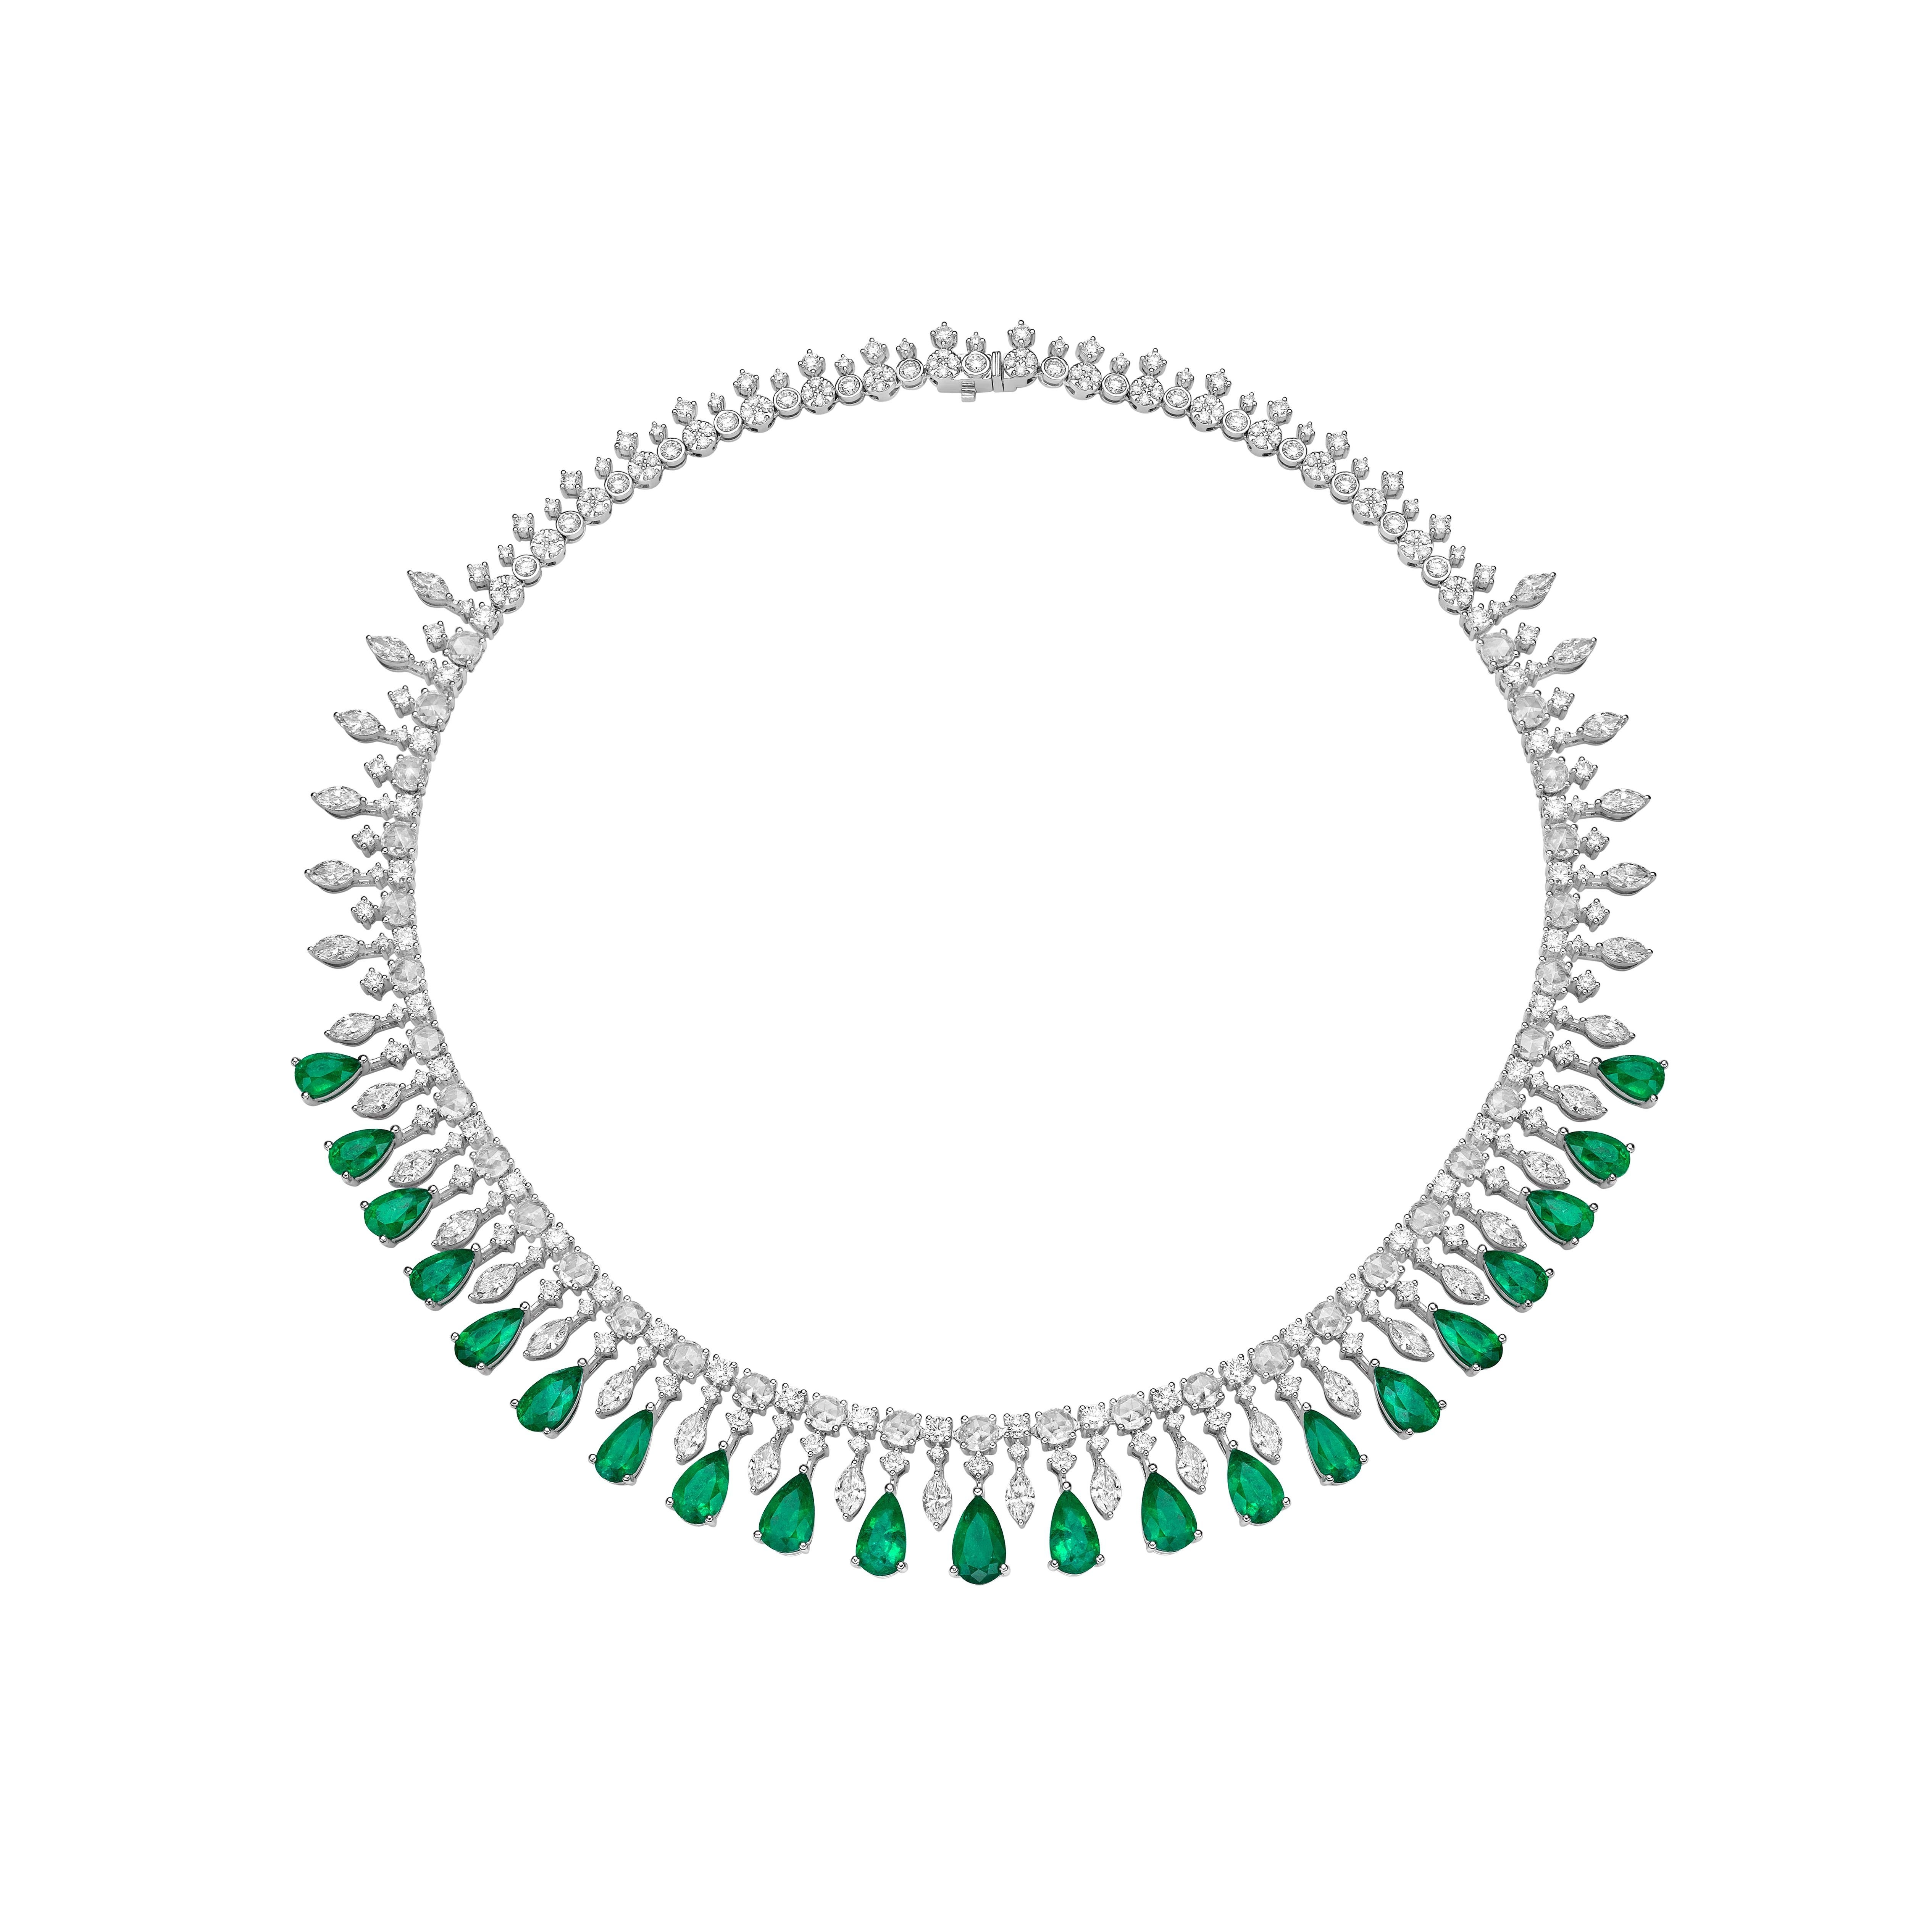 Pear Cut 16.81 Carat Emerald Necklace in 18Karat White Gold with Diamond. For Sale